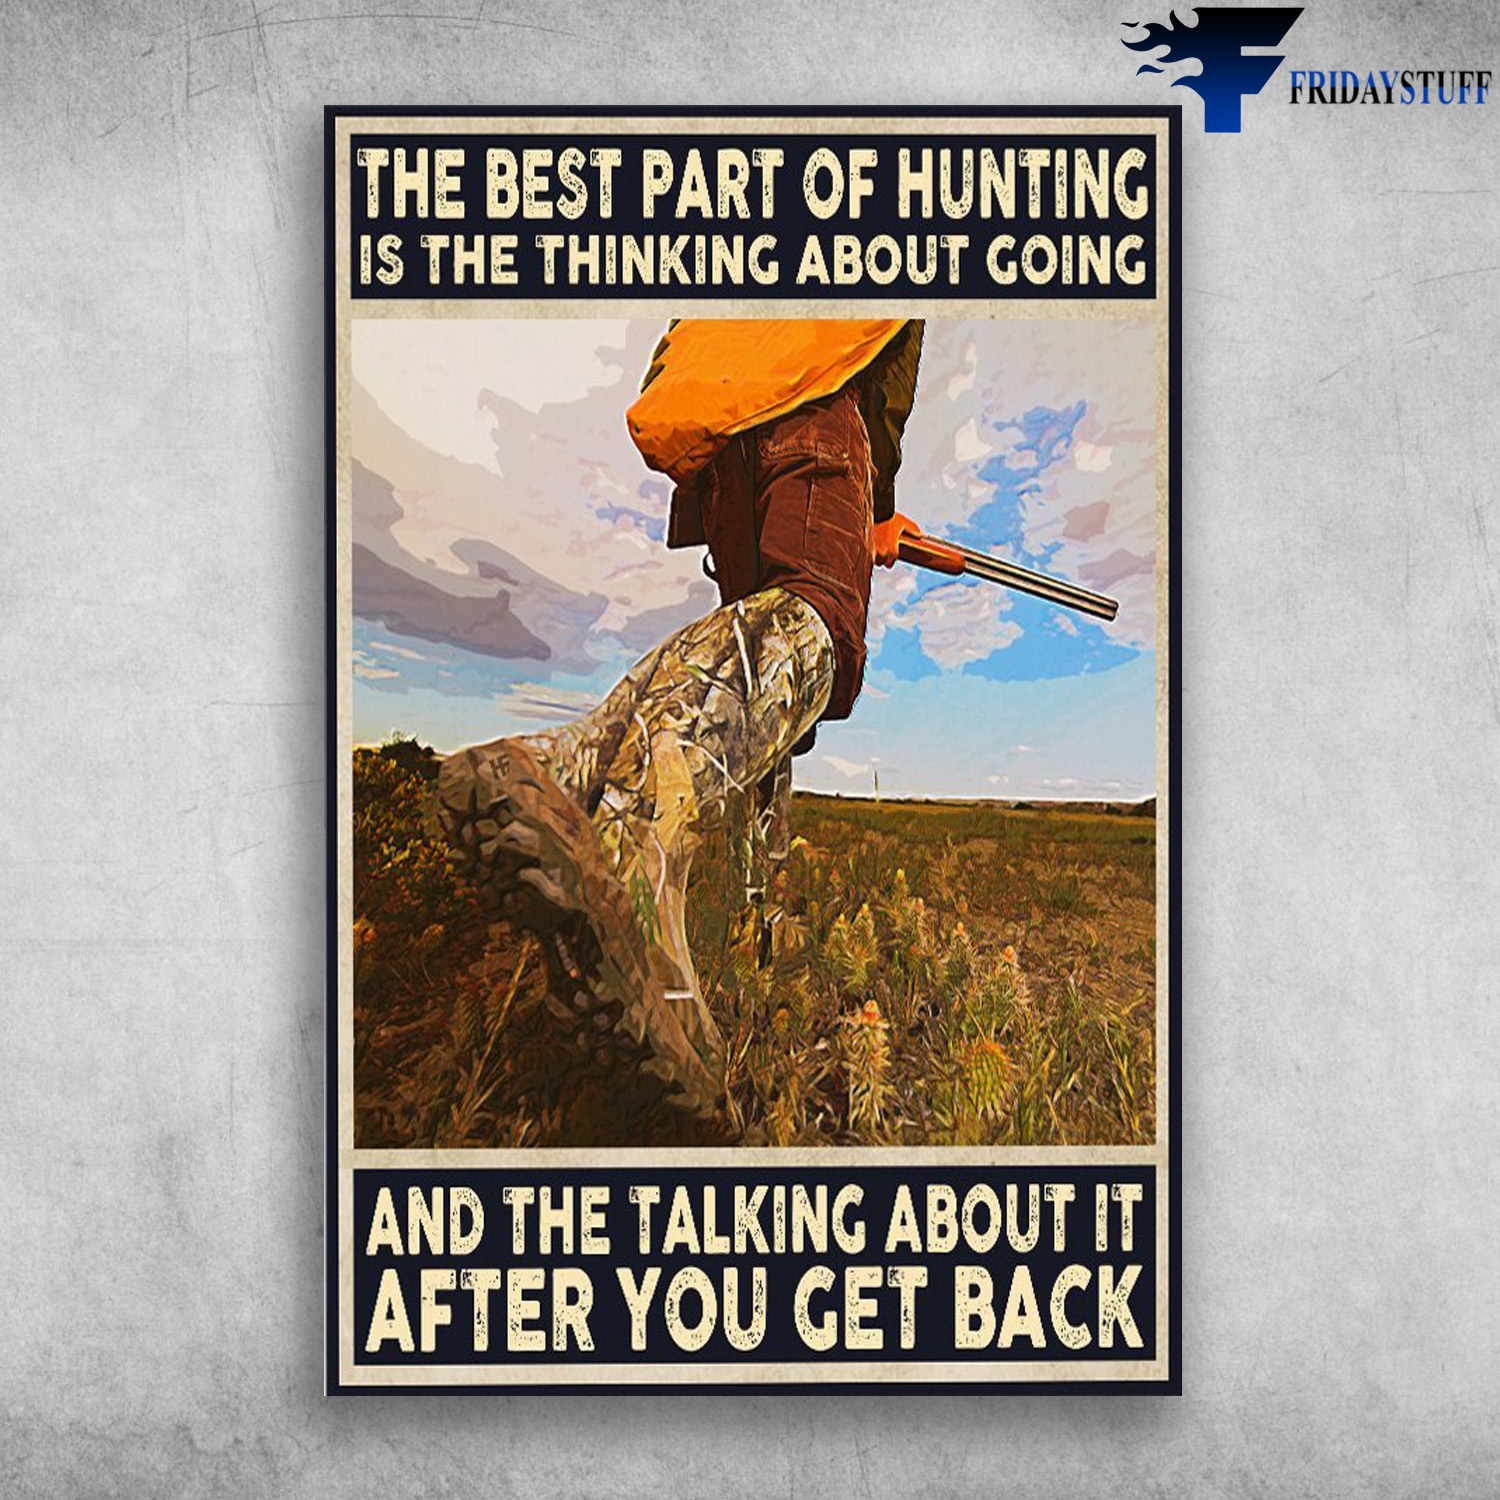 Man Hunting - The Best Part Of Hunting Is The Thinking About Going, And The Talking About It, After You Get Back